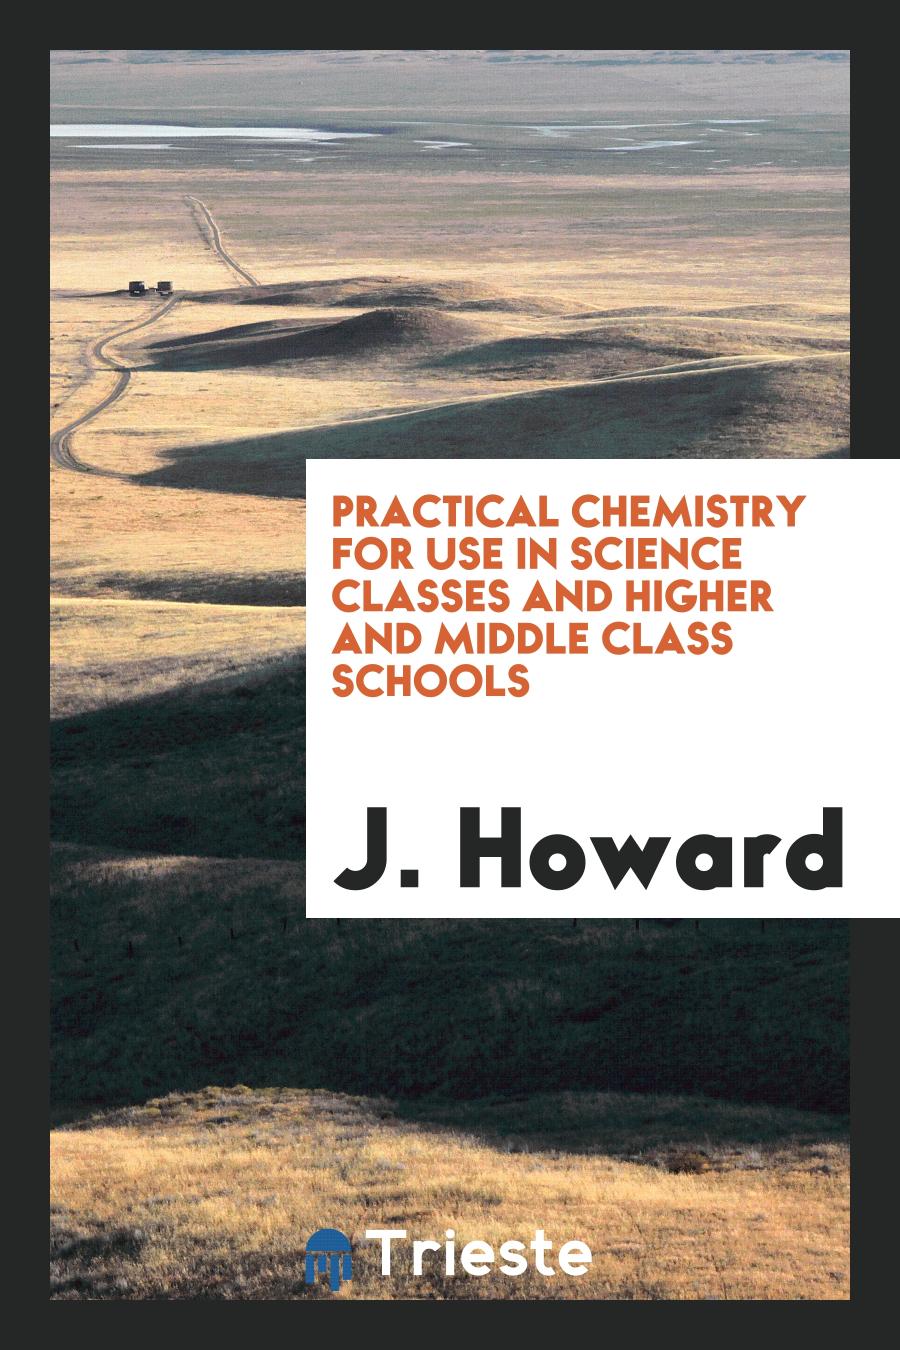 Practical Chemistry for Use in Science Classes and Higher and Middle Class Schools